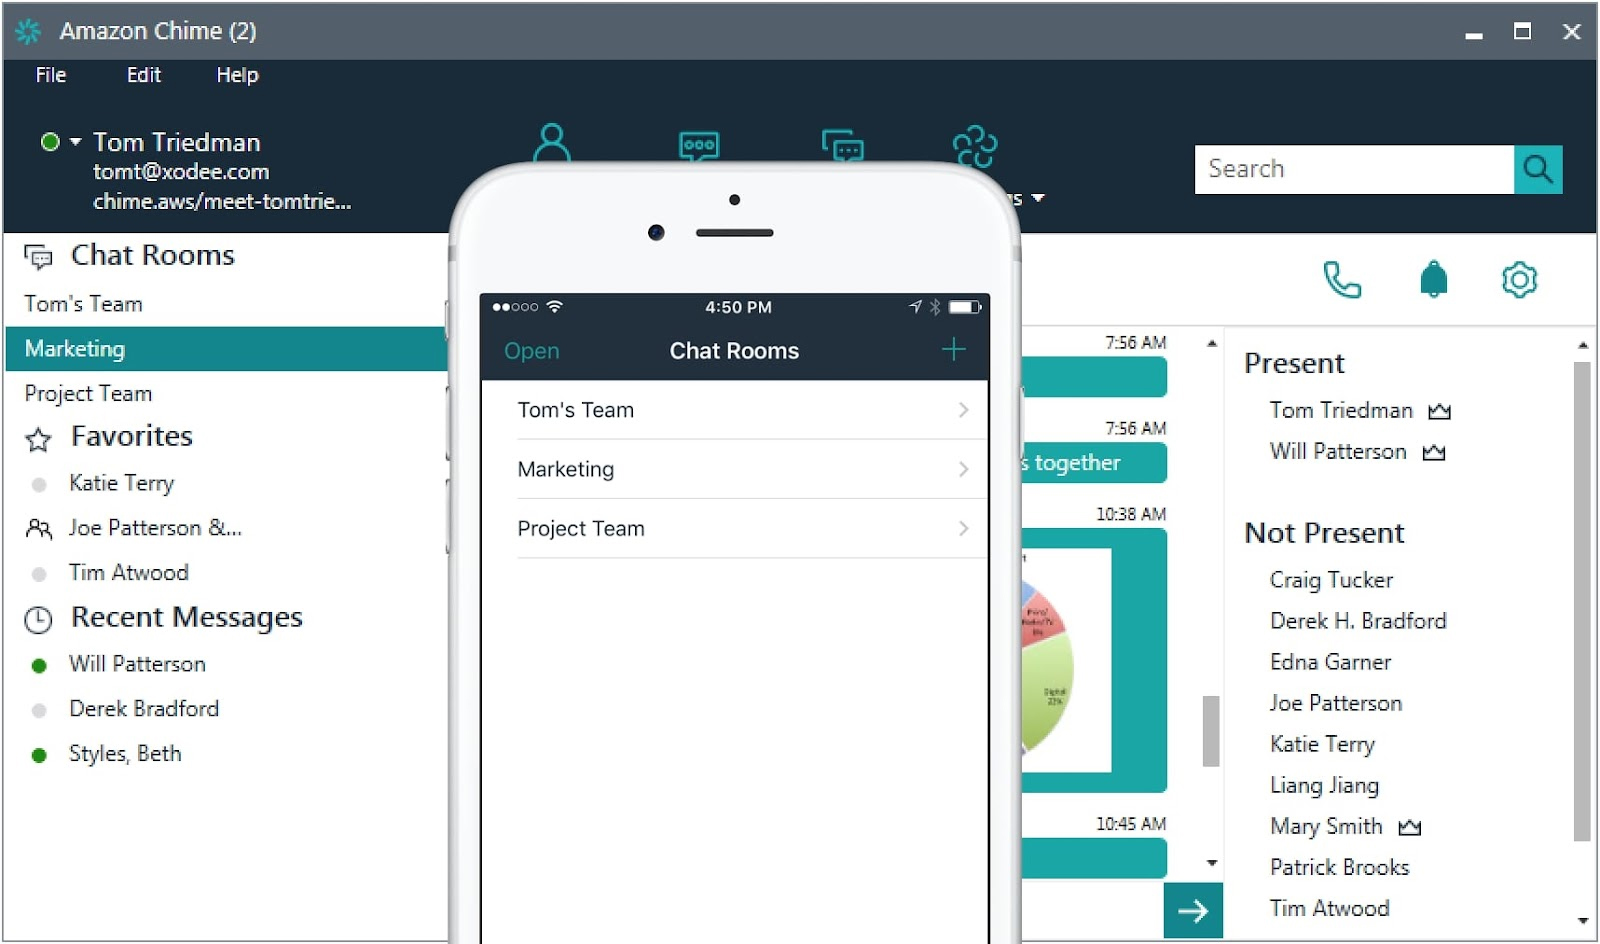 Mobile and desktop interface of Amazon Chime when using chat groups.